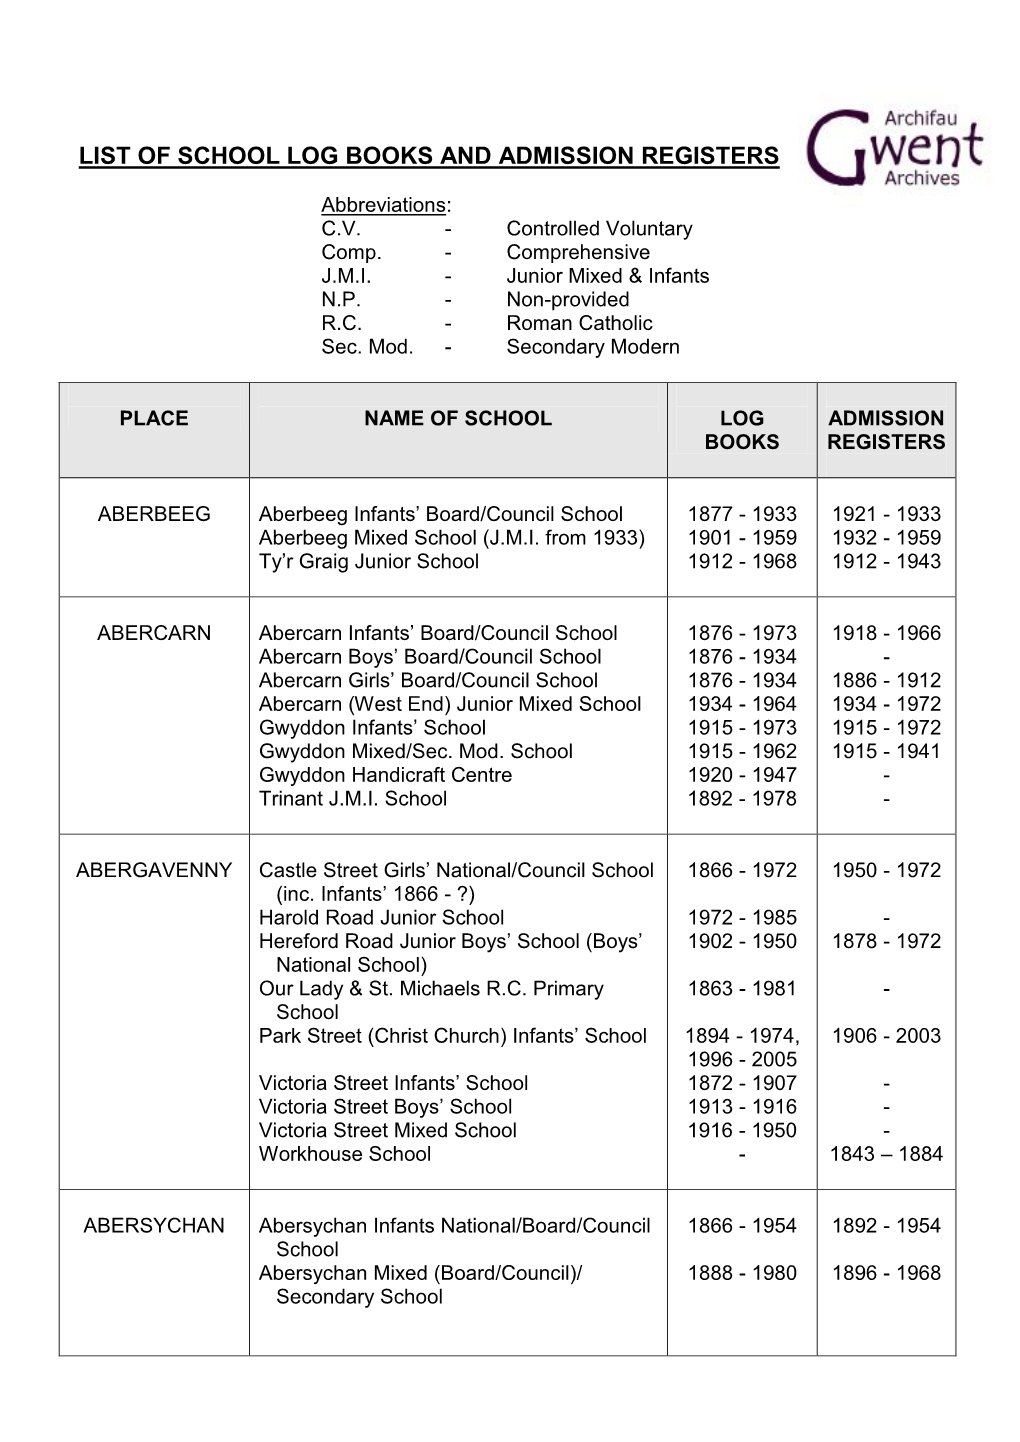 List of School Log Books and Admission Registers